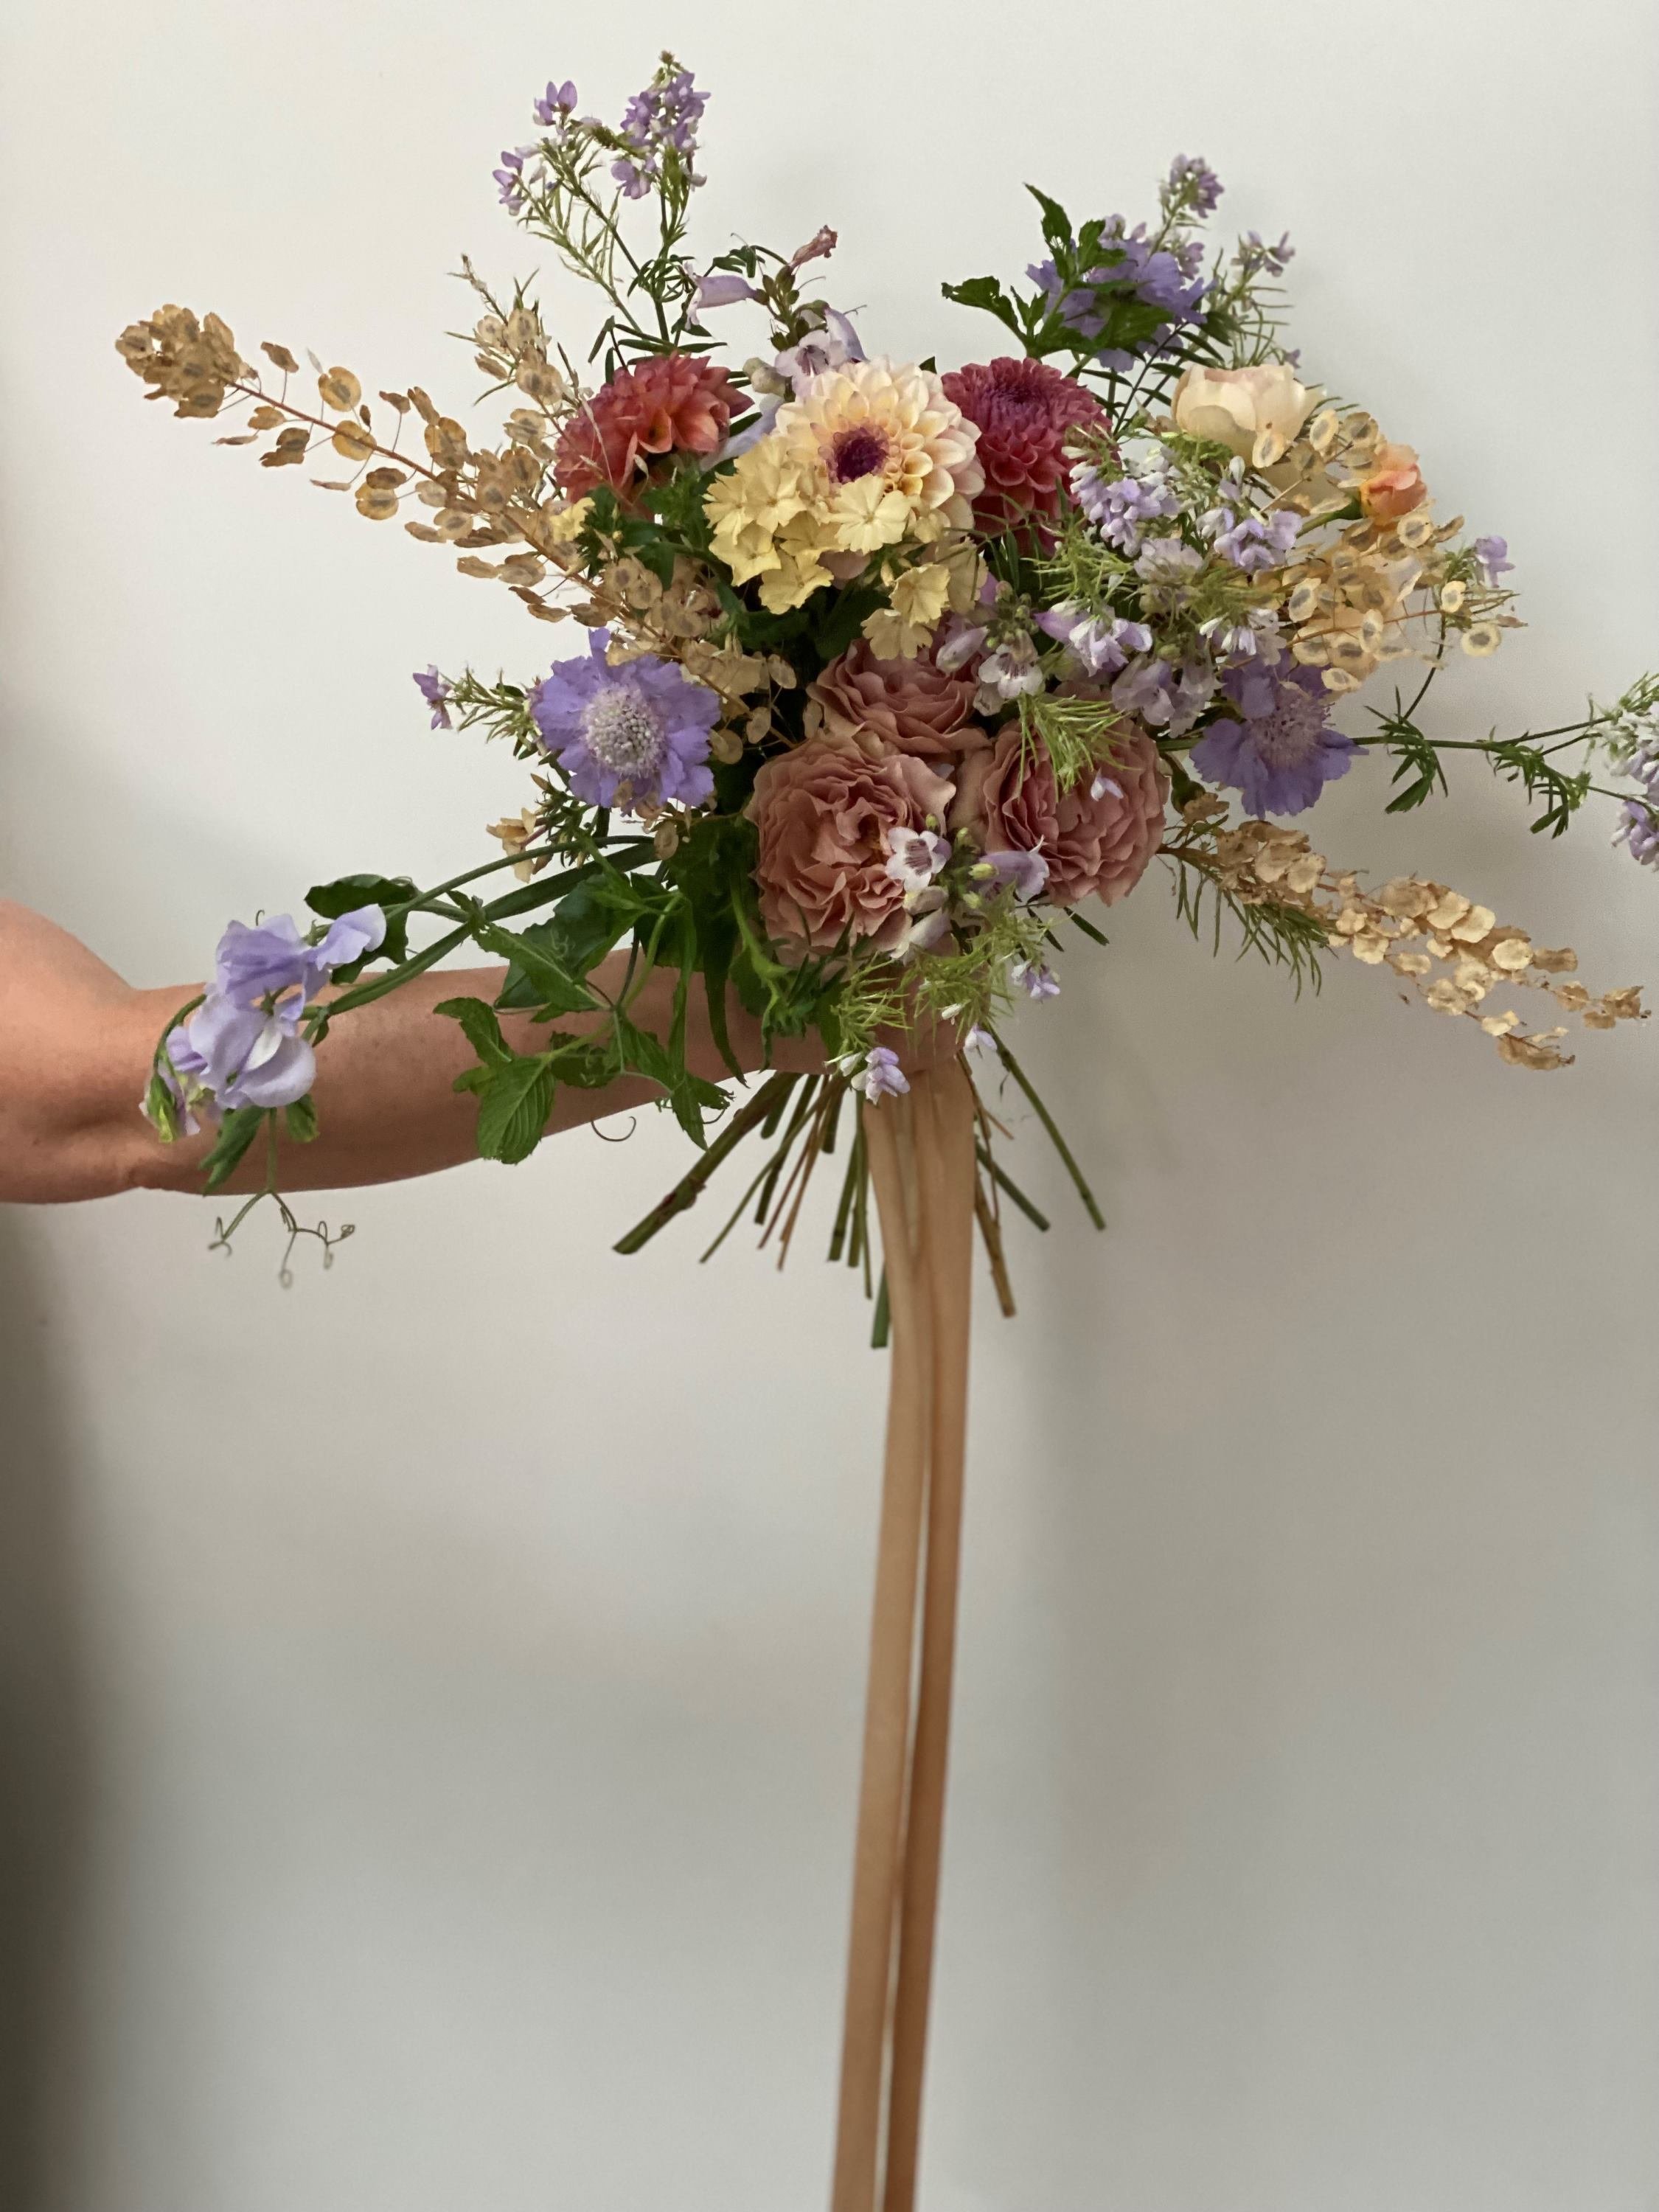 DIY Wedding Flowers Course Bridal Bouquet with beautiful British flowers